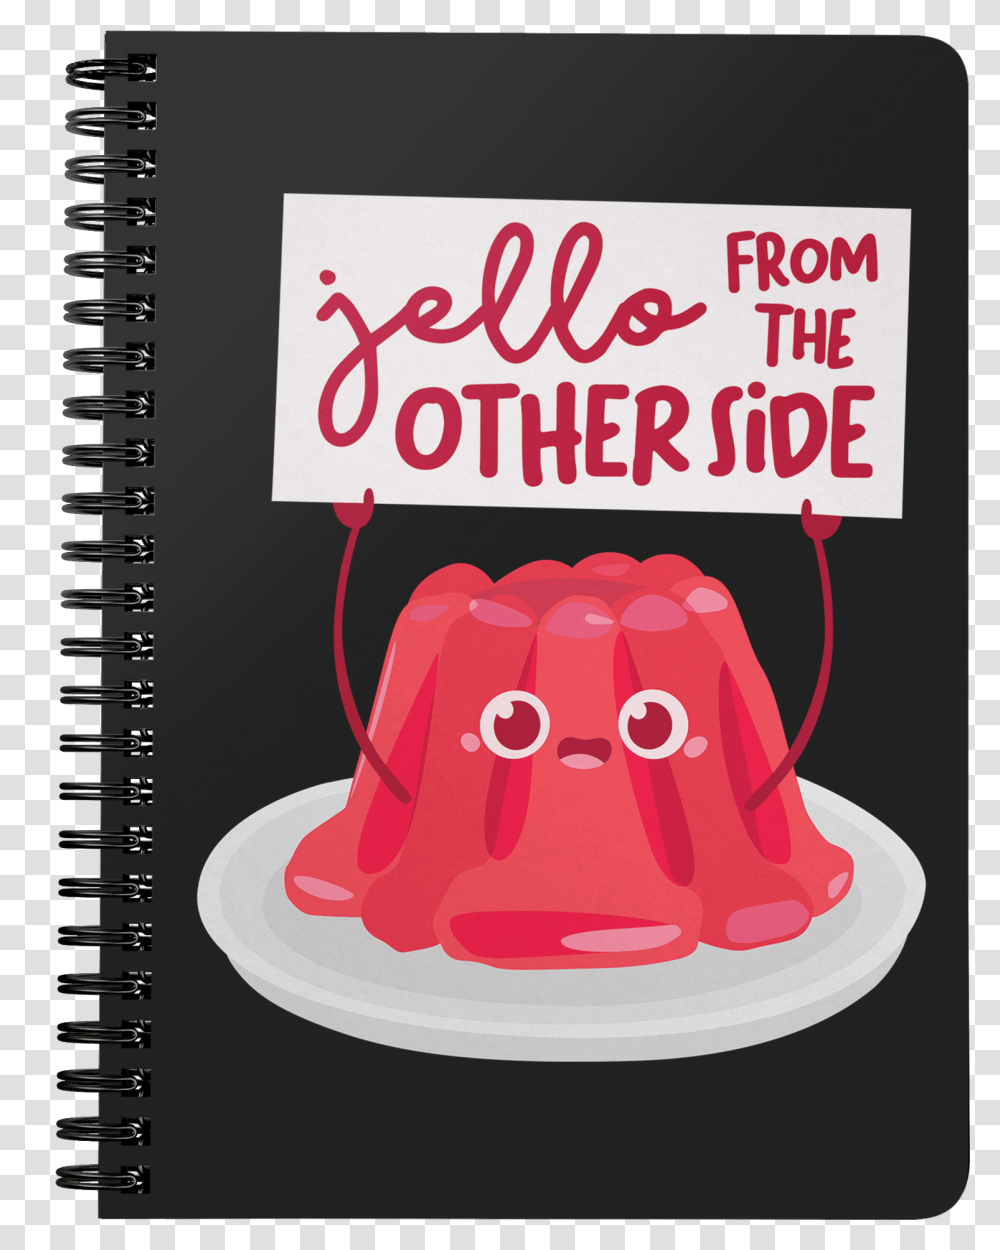 Jello From The Other Side Notebook, Cowbell, Food, Poster Transparent Png